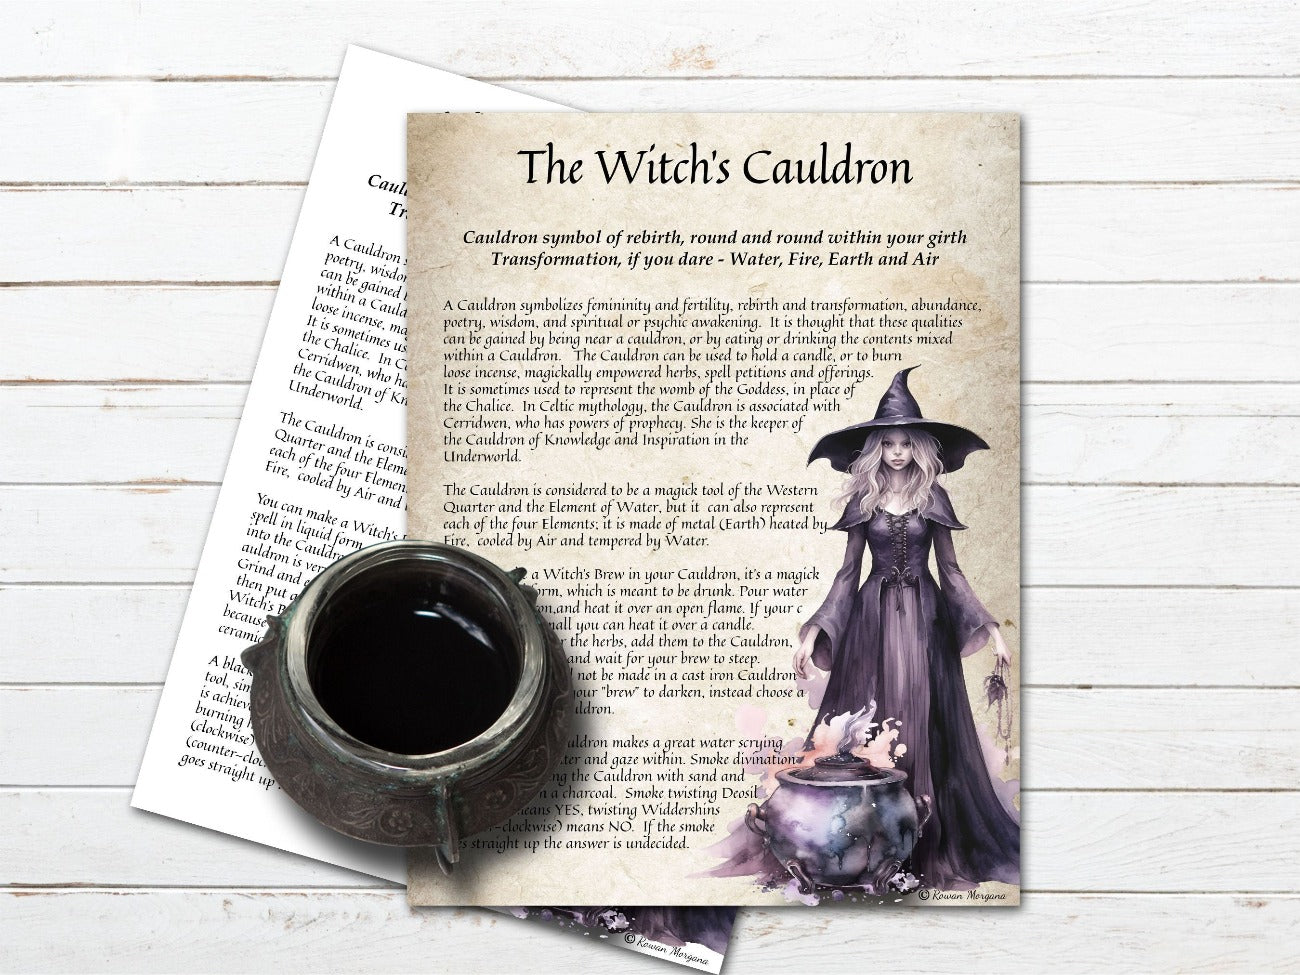 THE WITCHS CAULDRON, Make Magic Potions, Do Rituals and Spellcasting, Harness the energy of fertility and rebirth, Printable spellbook page - Morgana Magick Spell